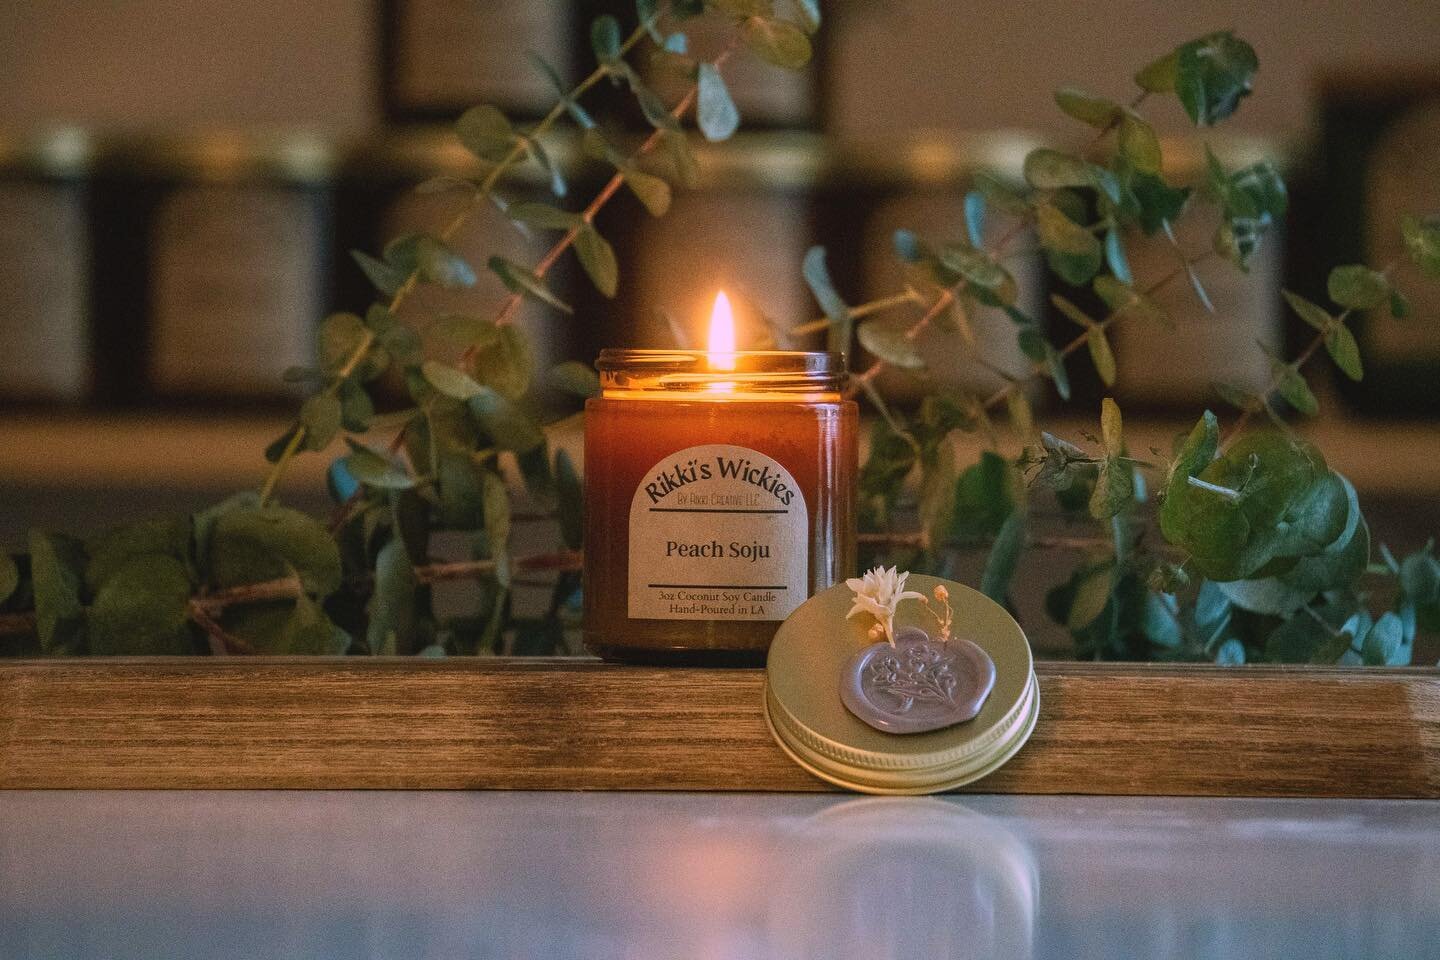 PEACH SOJU SCENTED CANDLES - One of our new summer favs!
&bull;
This scent is refreshing and peachy with a slight floral syrup smell for the &ldquo;soju&rdquo; notes. For my non-drinkers, it&rsquo;s also been compared to smelling like Peach Rings 🍬 